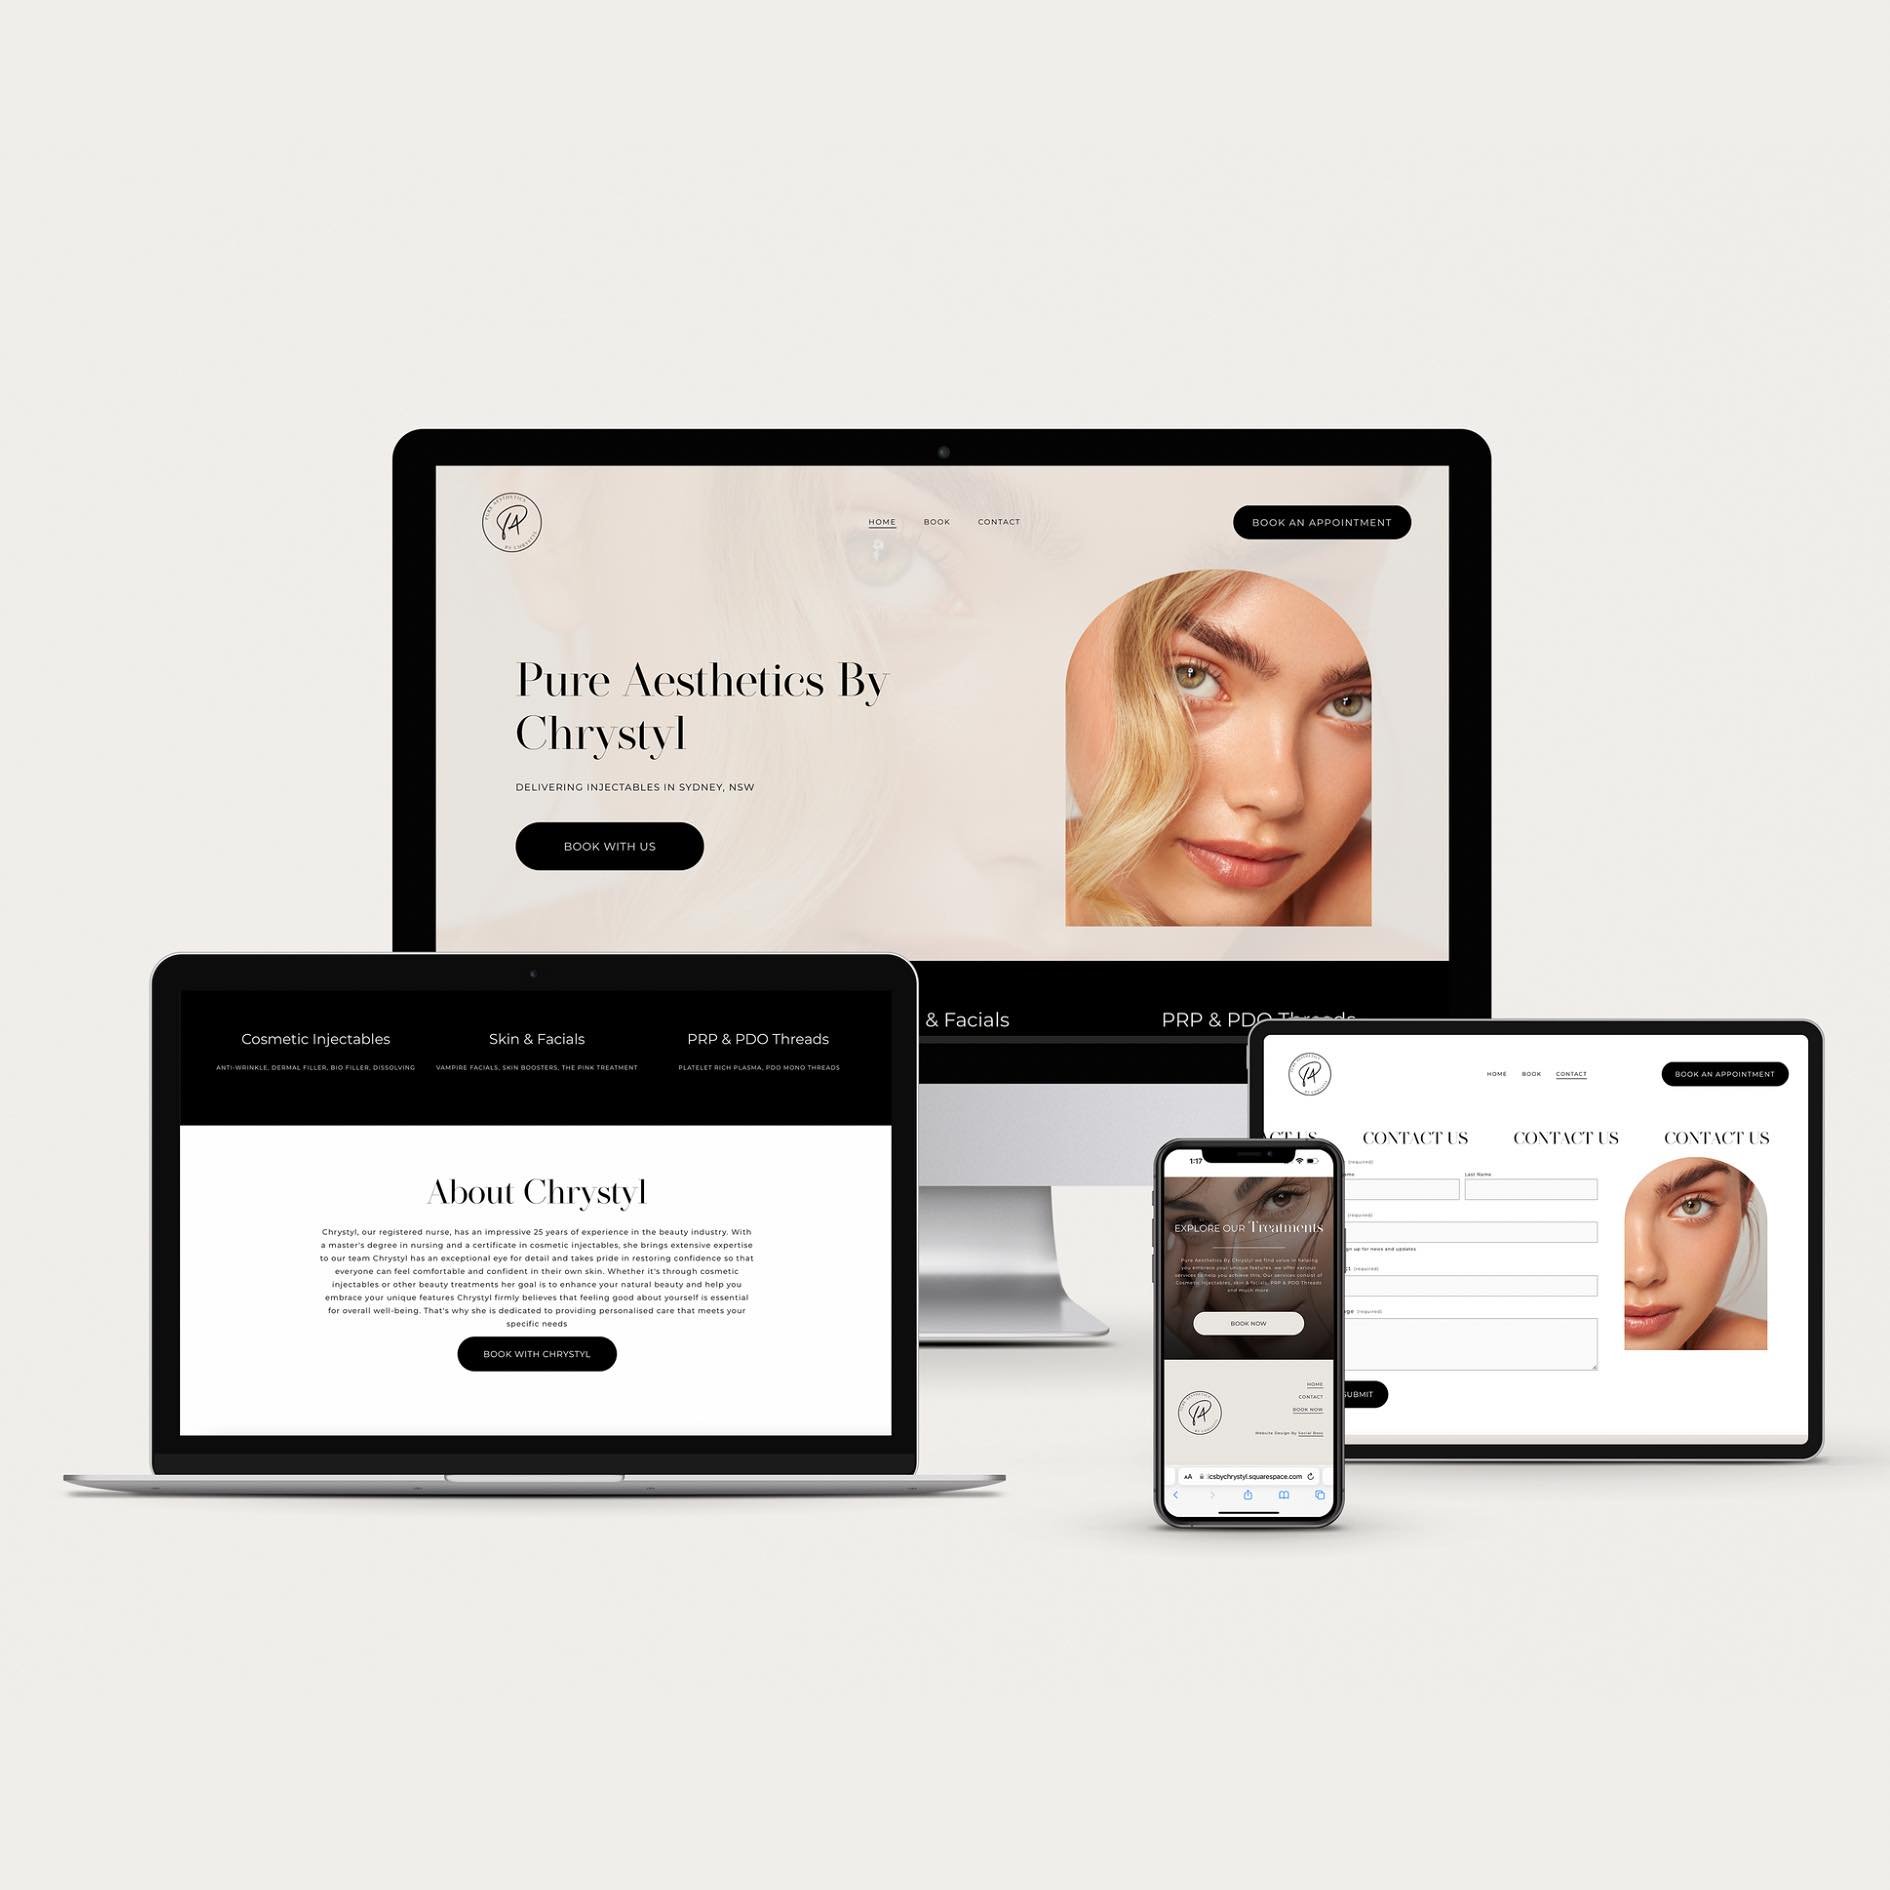 Cosmetic Injectables Business Website Design By Social Boss ✨💻

Every website we design is customised to our clients business and brand. We create aesthetically pleasing and highly functional websites that is mobile-friendly and easy to navigate for